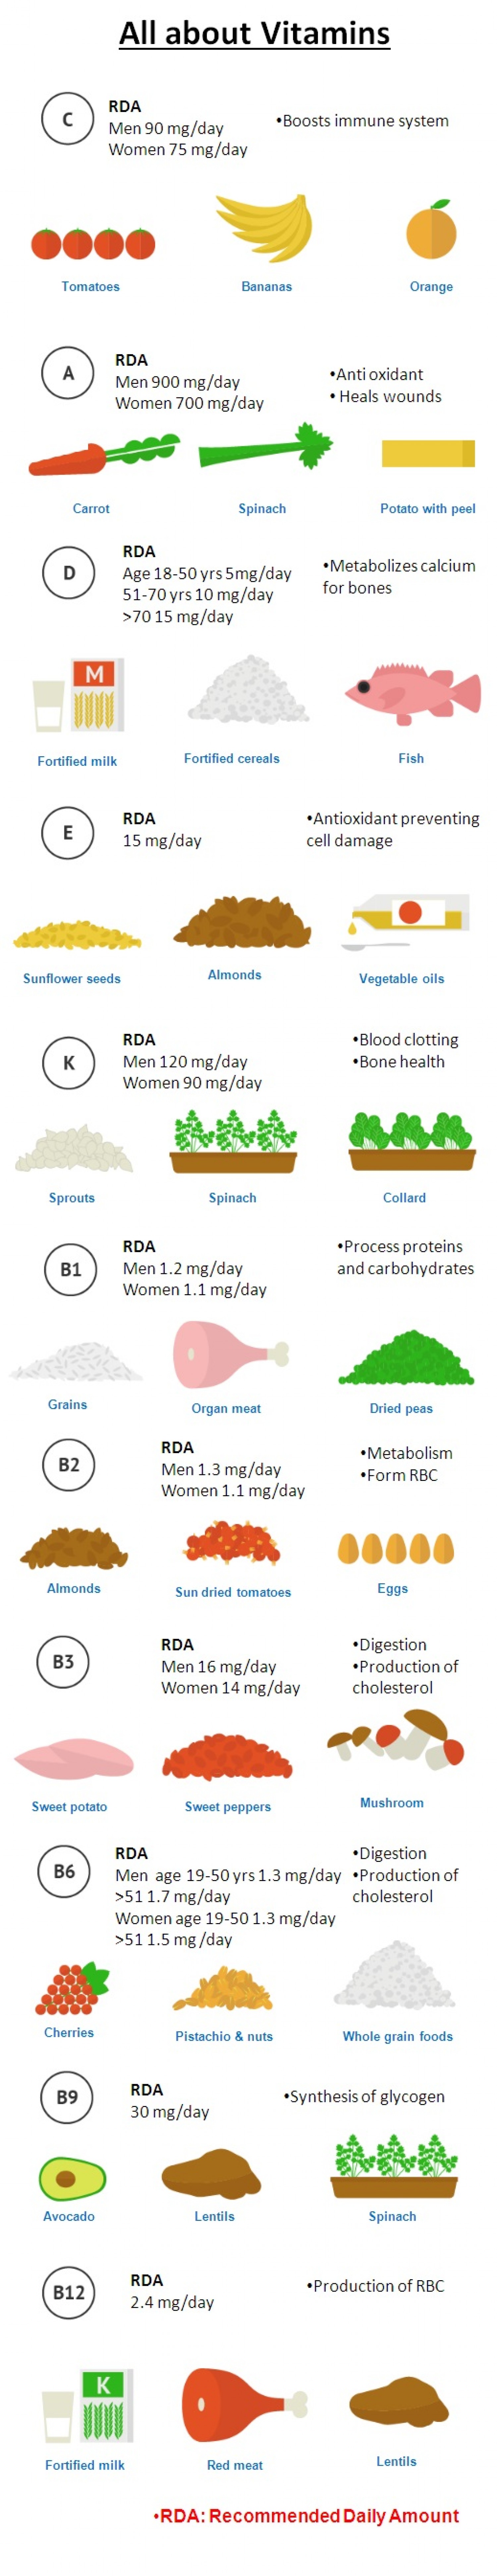 The necessary vitamins and the foods where you can get them infographic.